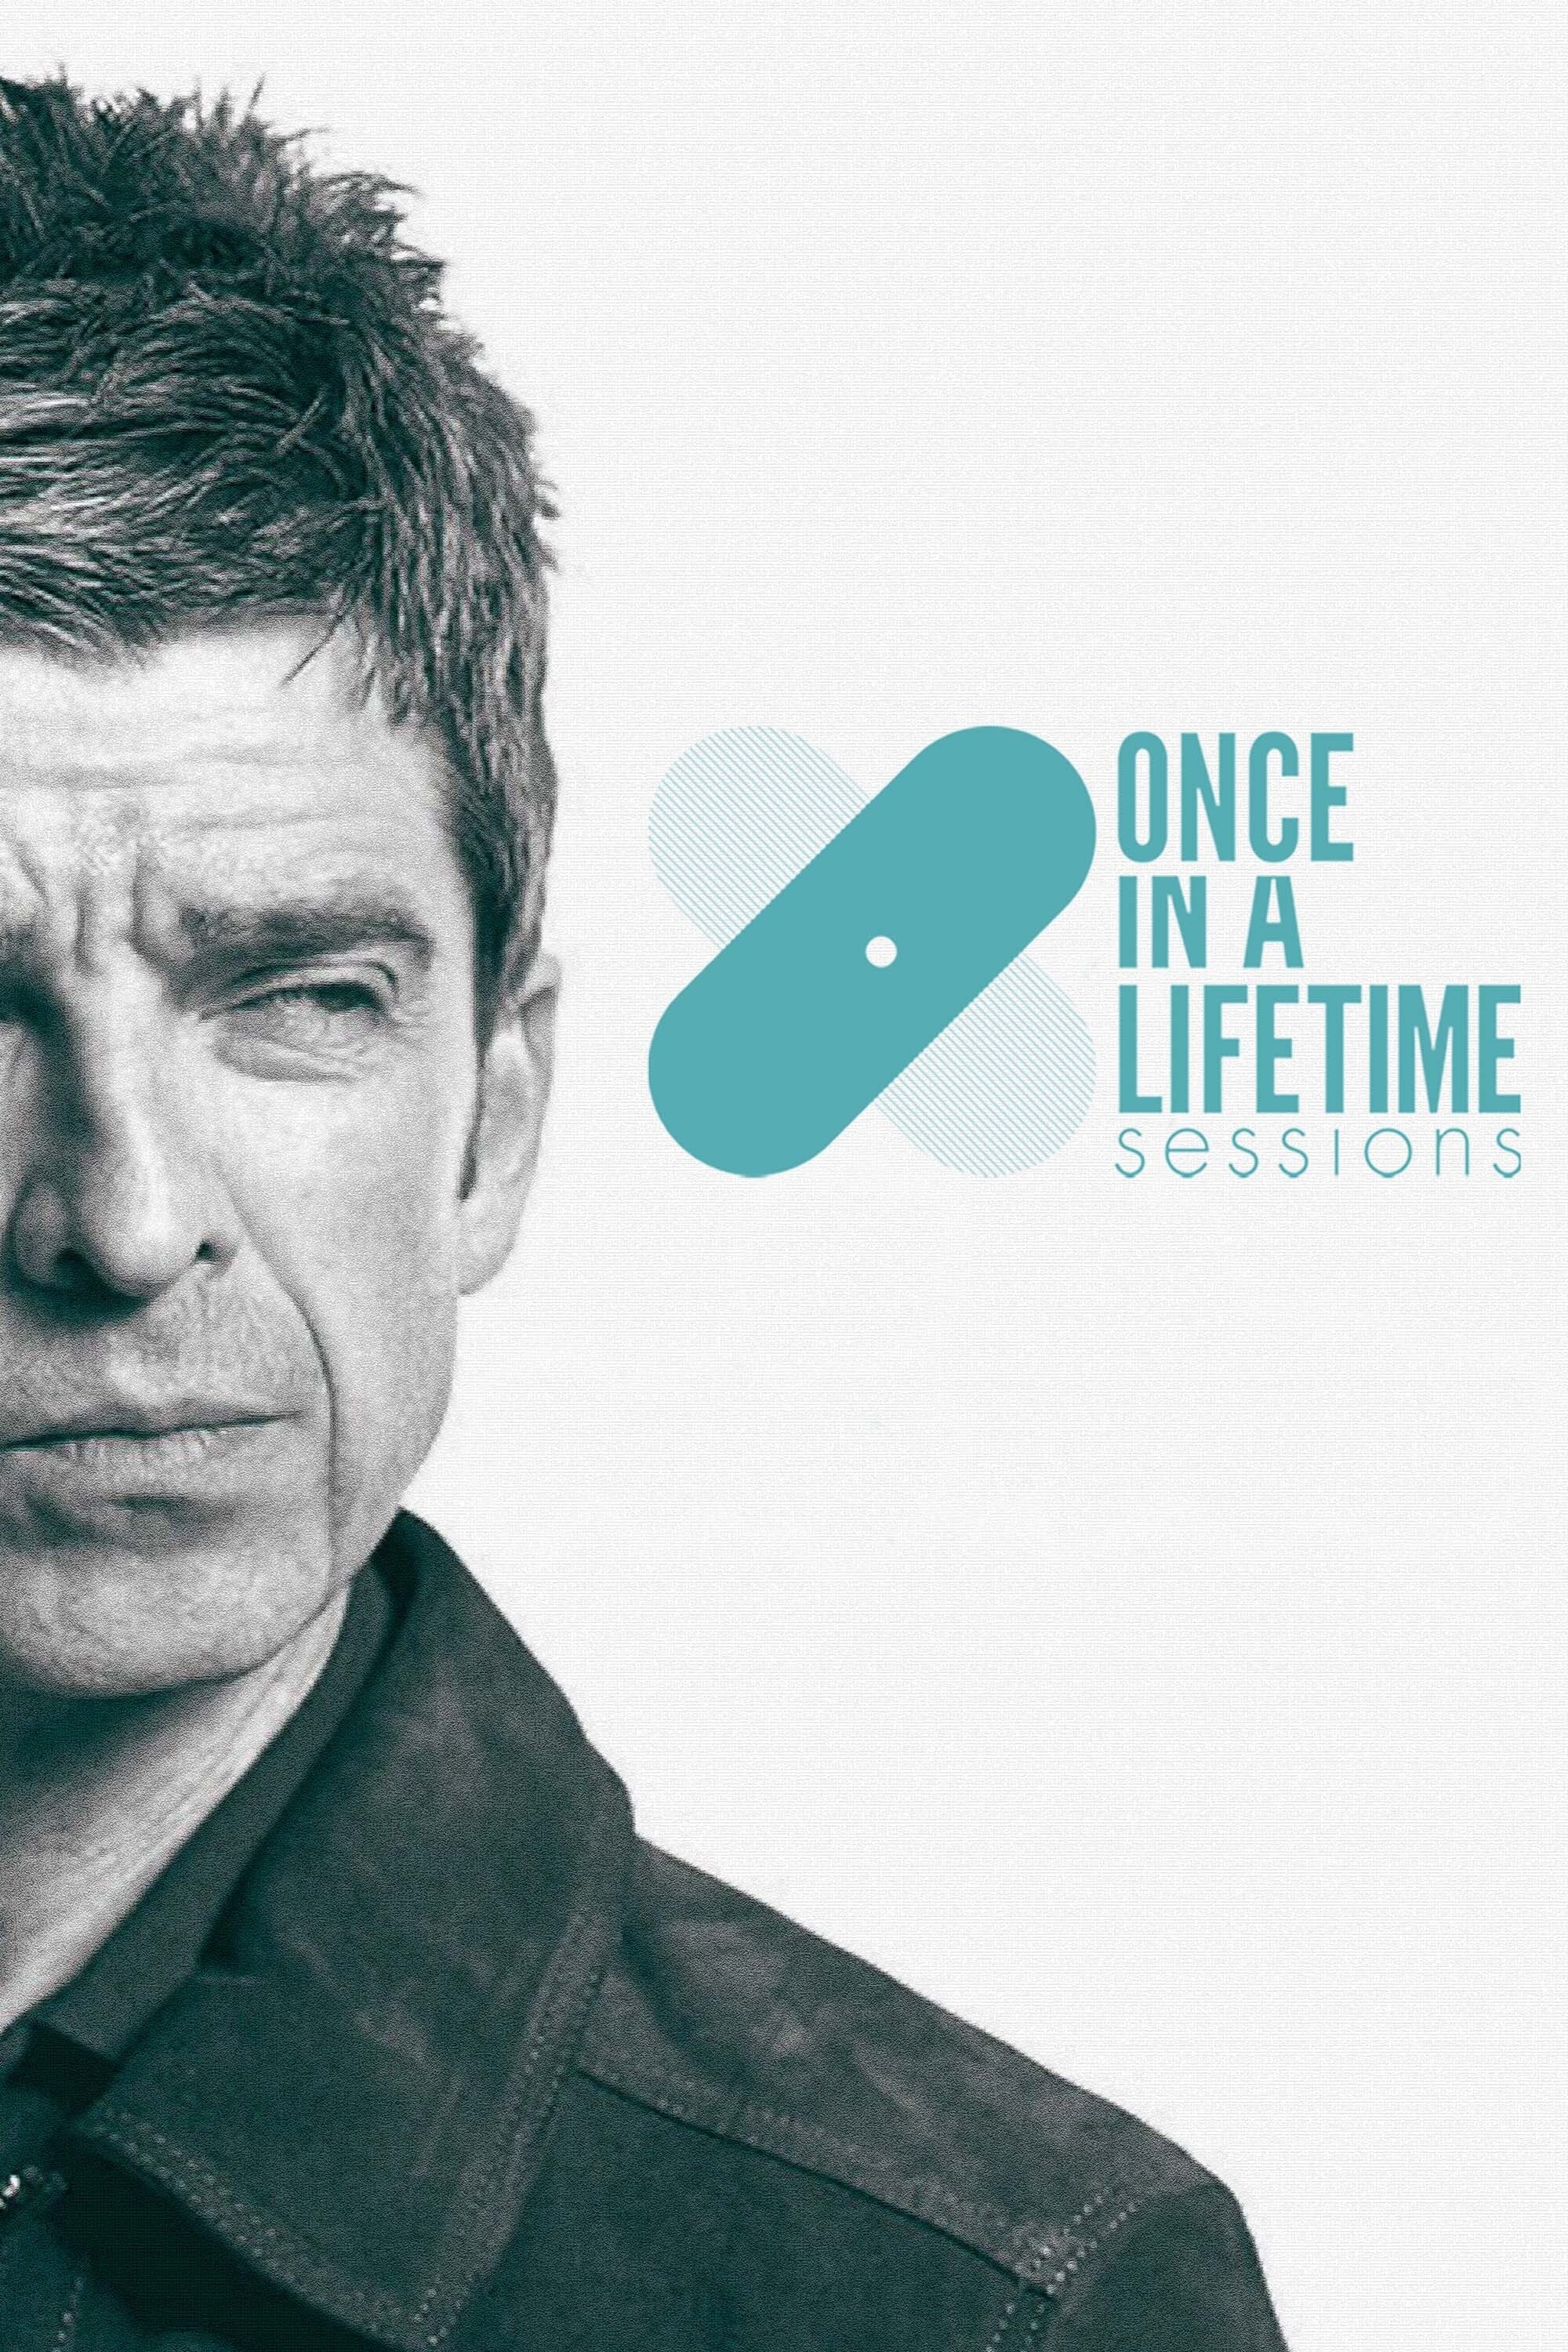 Once in a Lifetime Sessions with Noel Gallagher